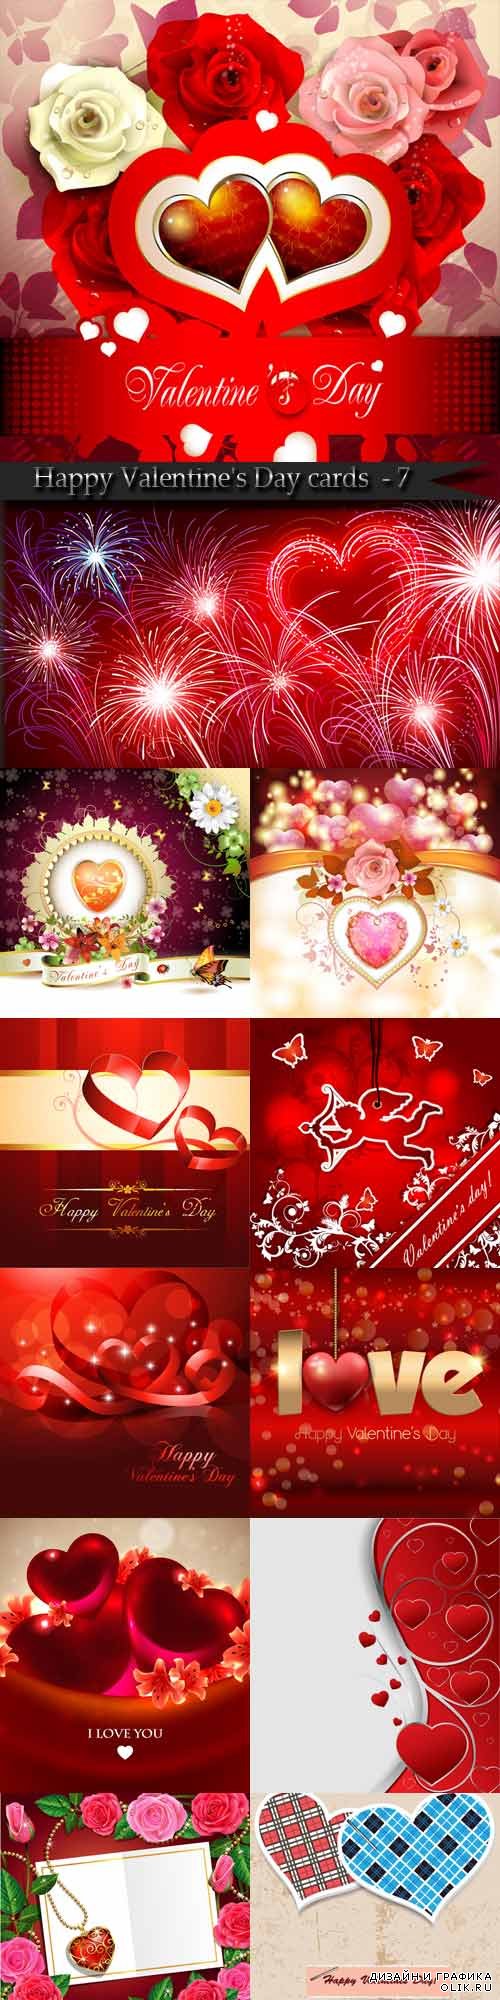 Happy Valentine's Day cards and backgrounds - 7